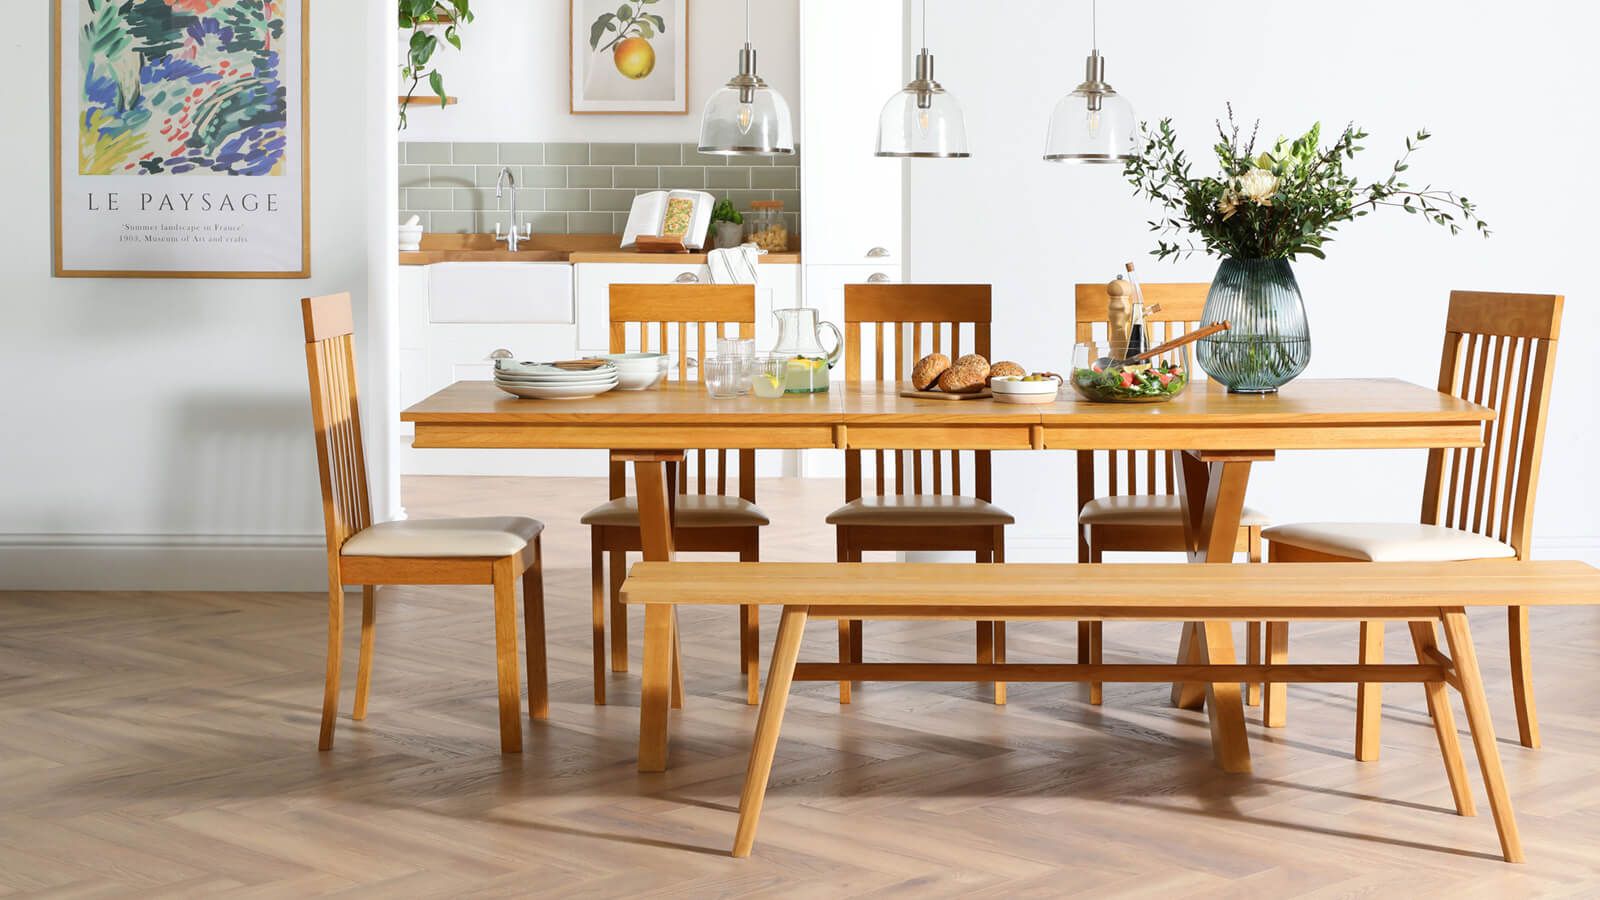 Timeless wooden trestle dining set with chairs and bench in a kitchen-diner